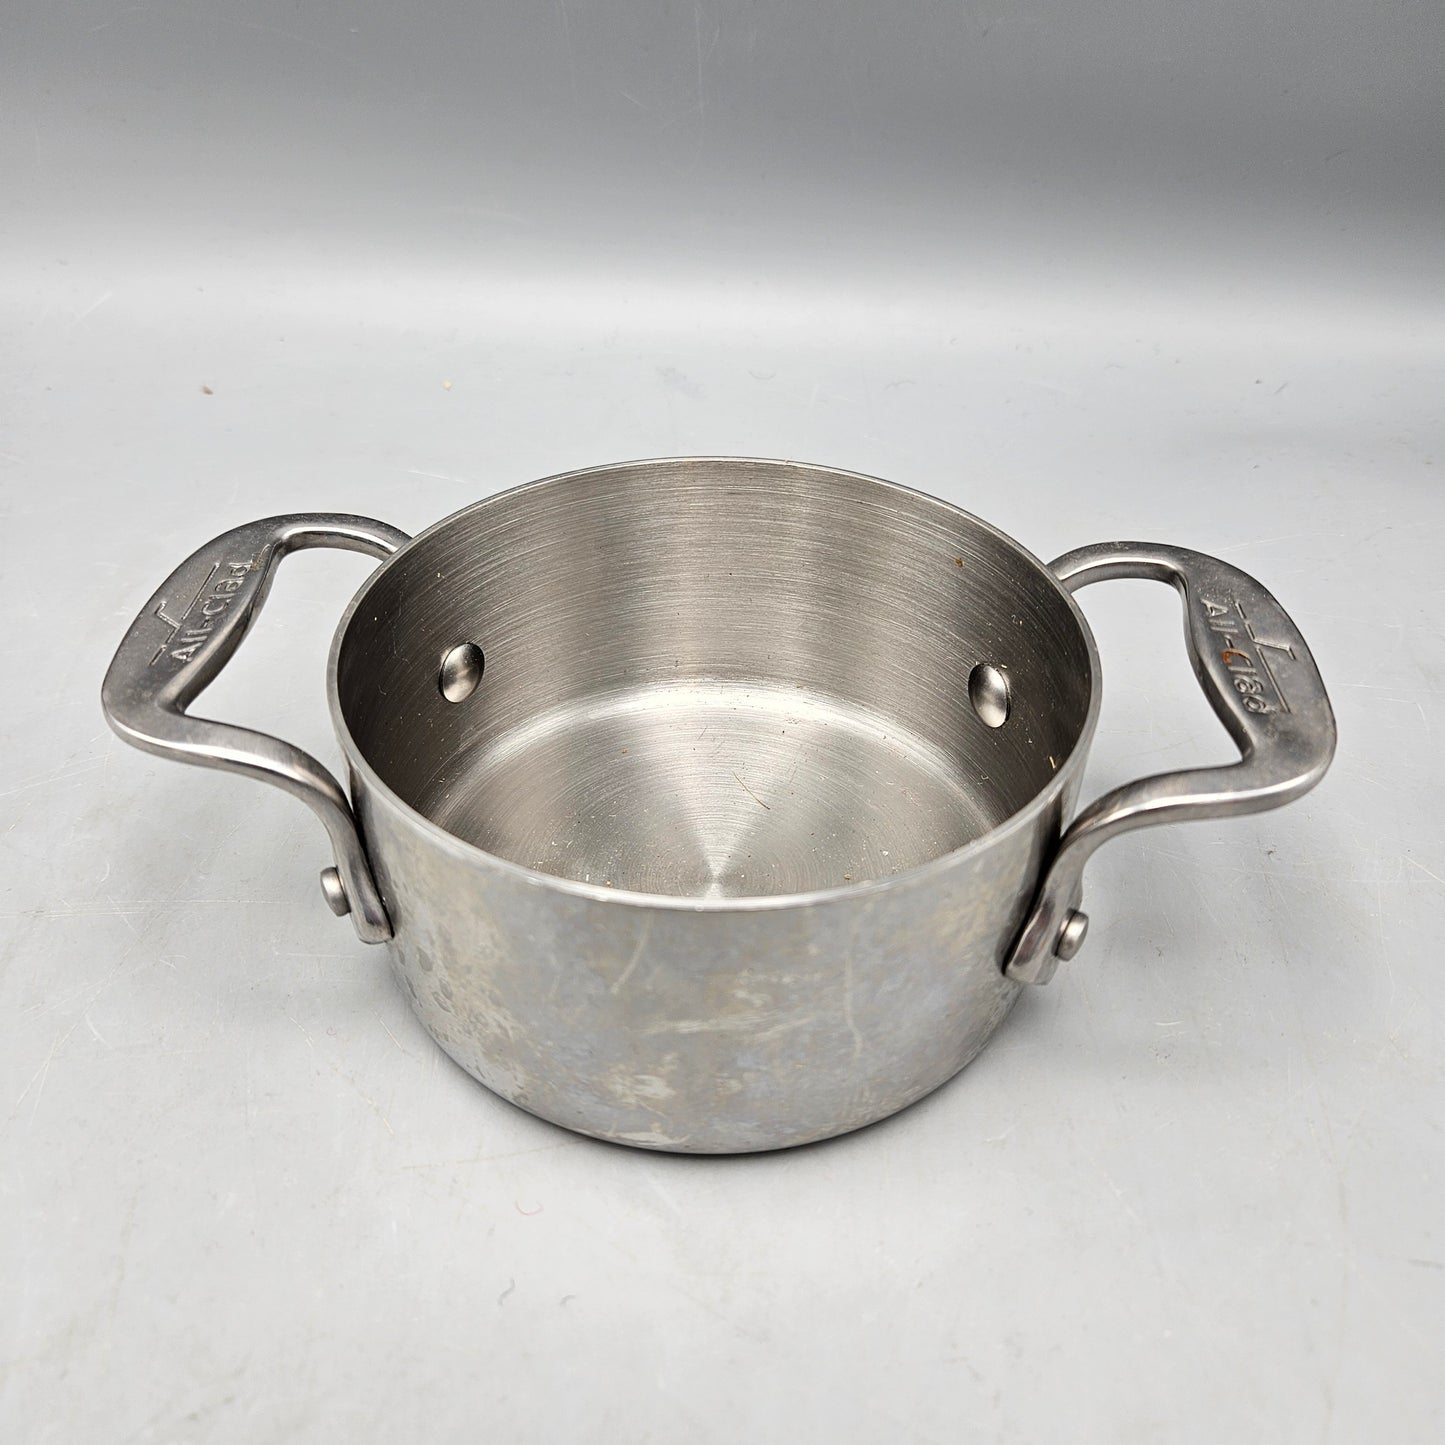 All-Clad Stainless Steel 1/2 Quart Cocotte Saucepan with lid